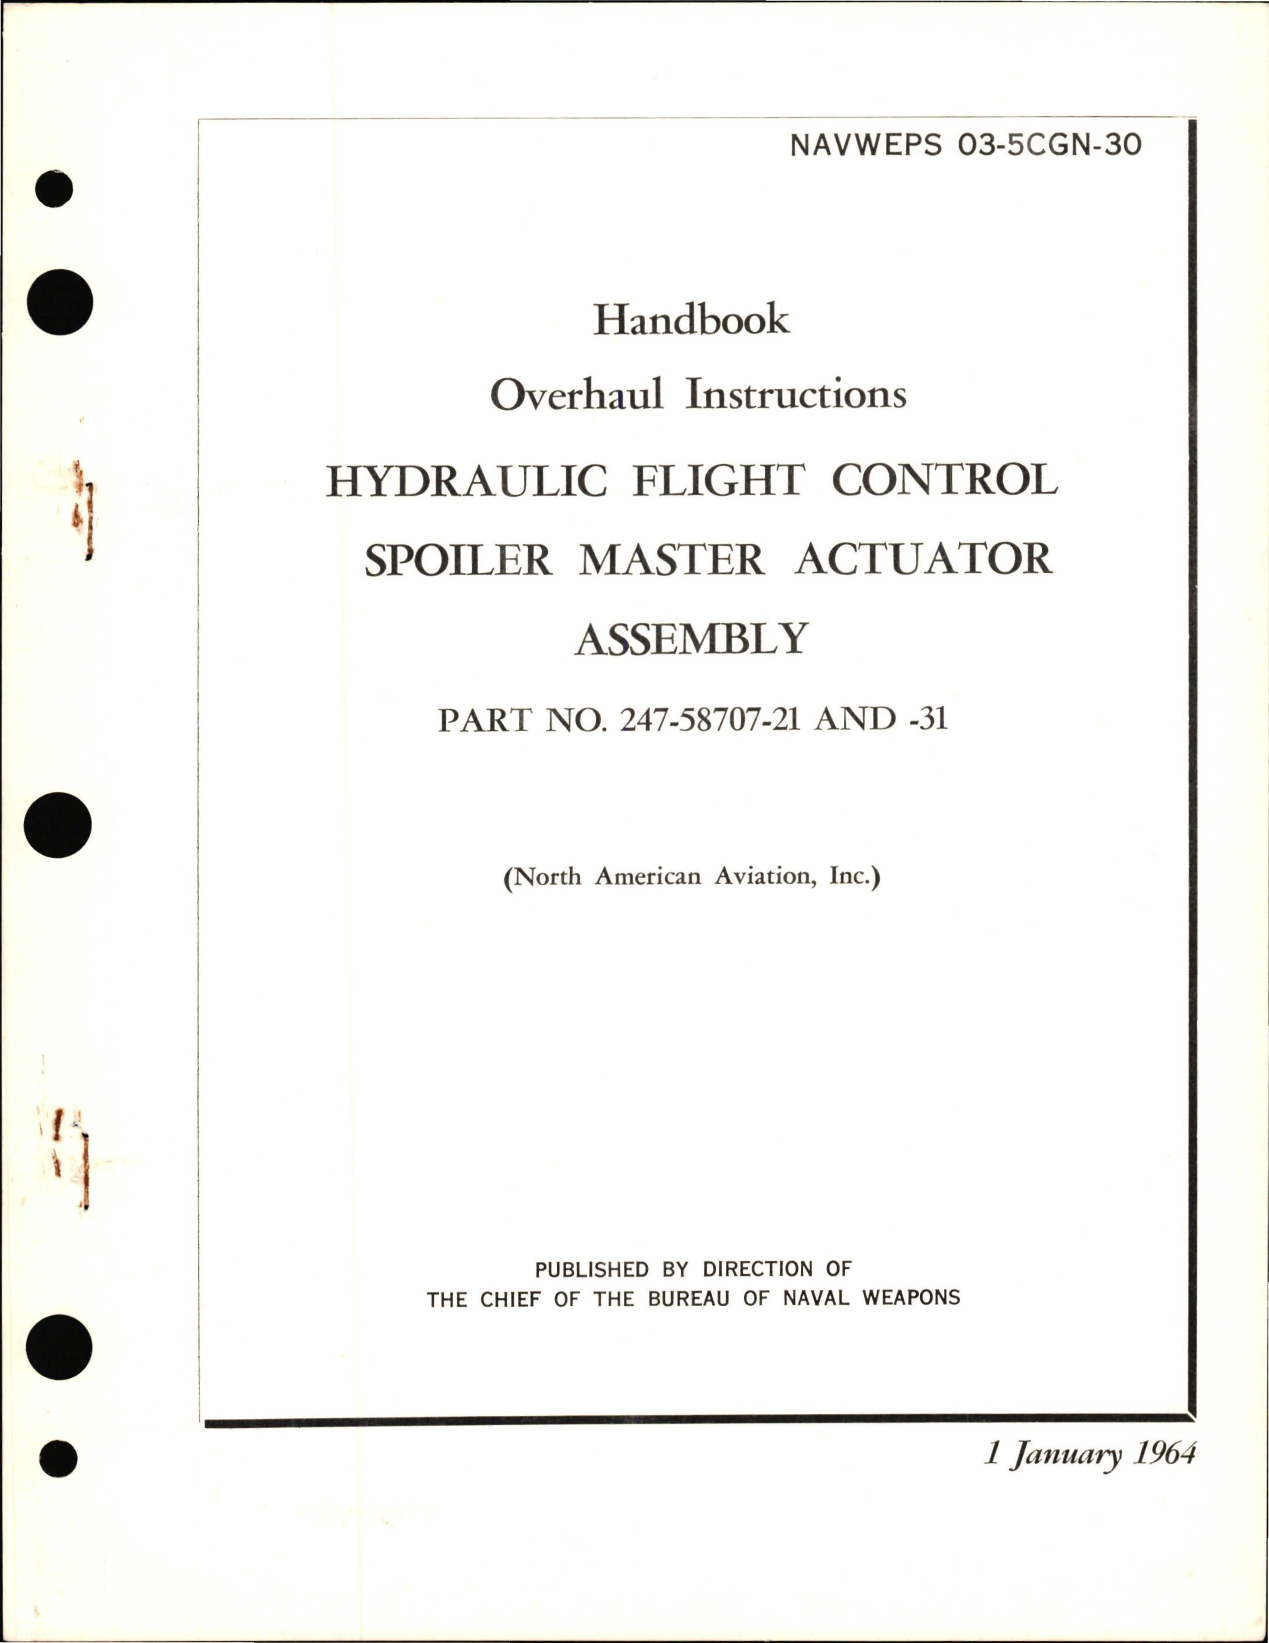 Sample page 1 from AirCorps Library document: Overhaul Instructions for Hydraulic Flight Control, Spoiler Master Actuator Assembly - Part 247-58707-21 and 247-58707-31